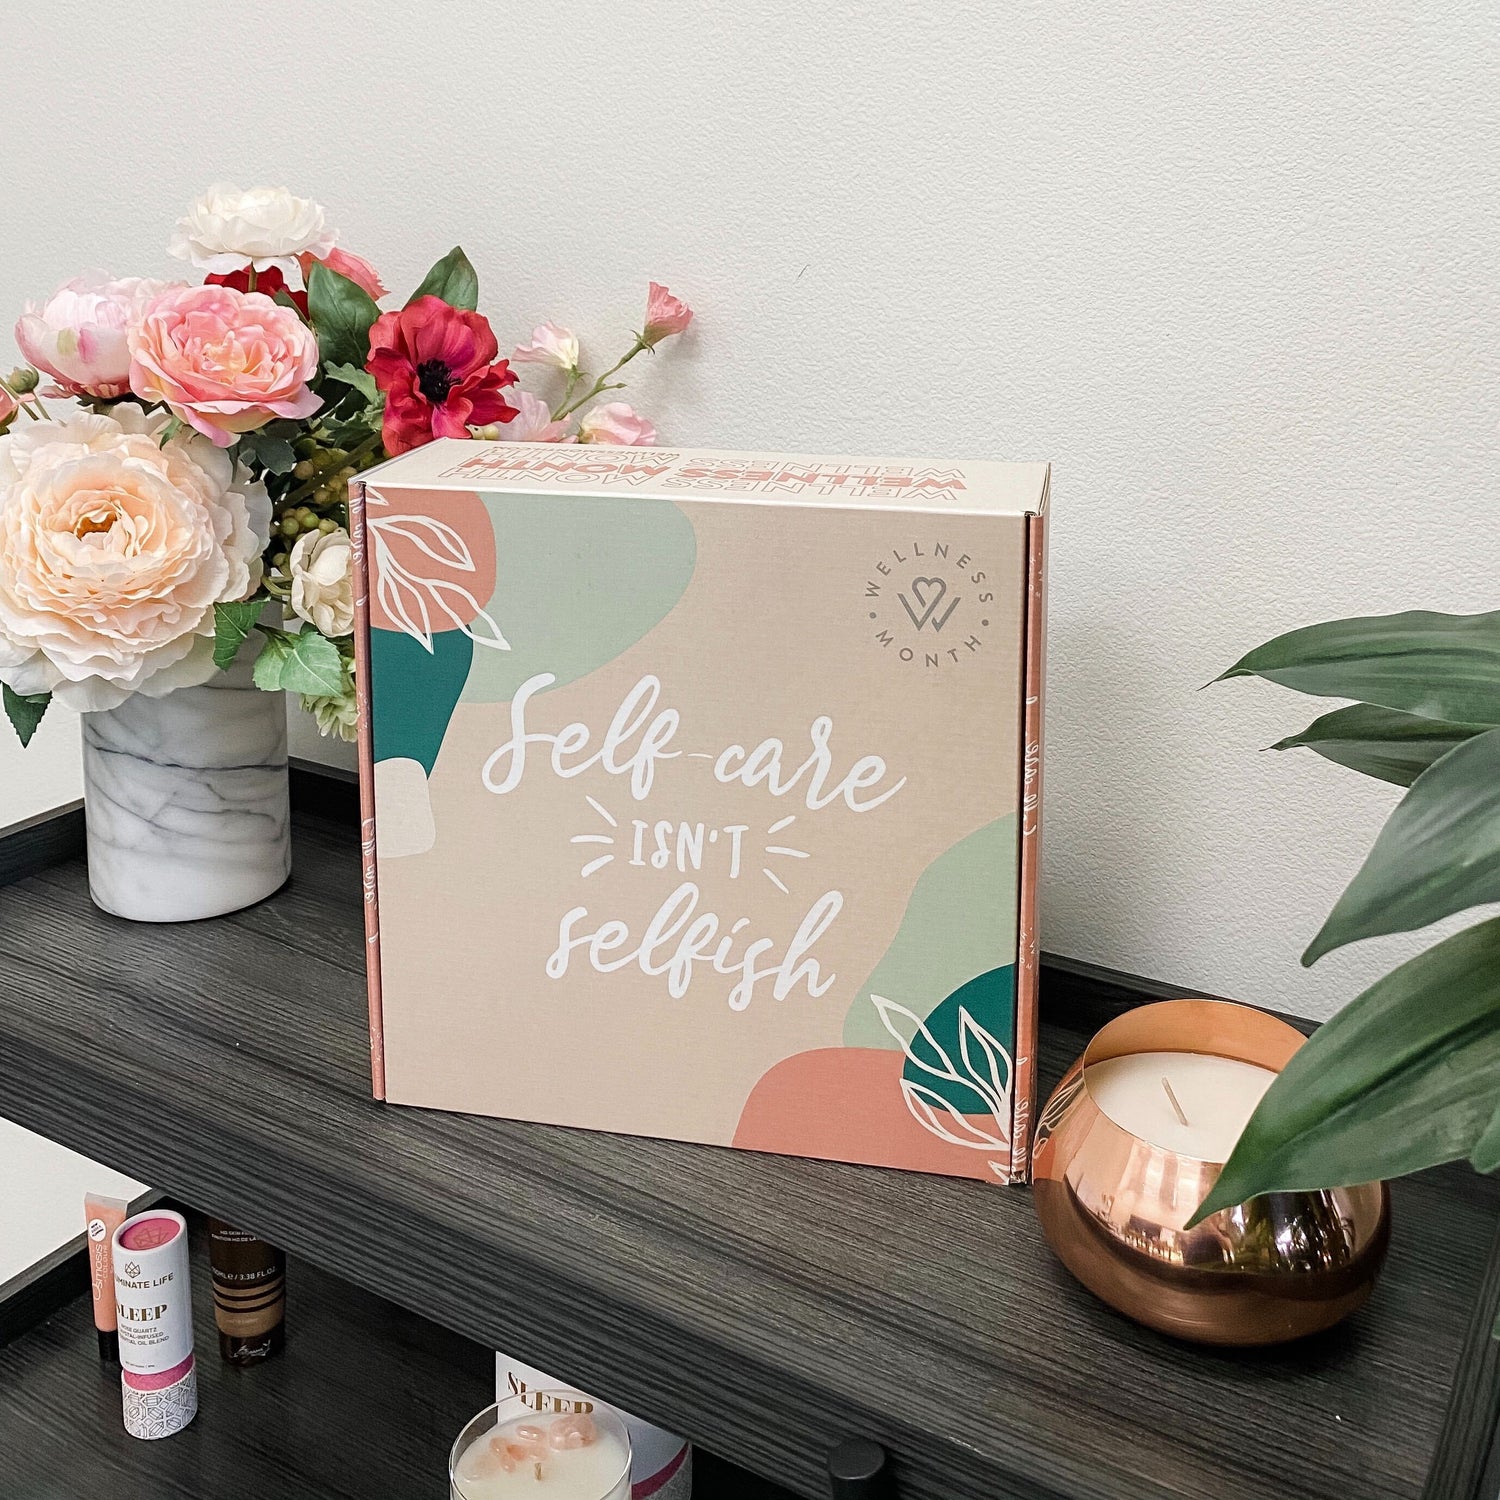 Exclusive Wellness Month Box - August is Wellness Month